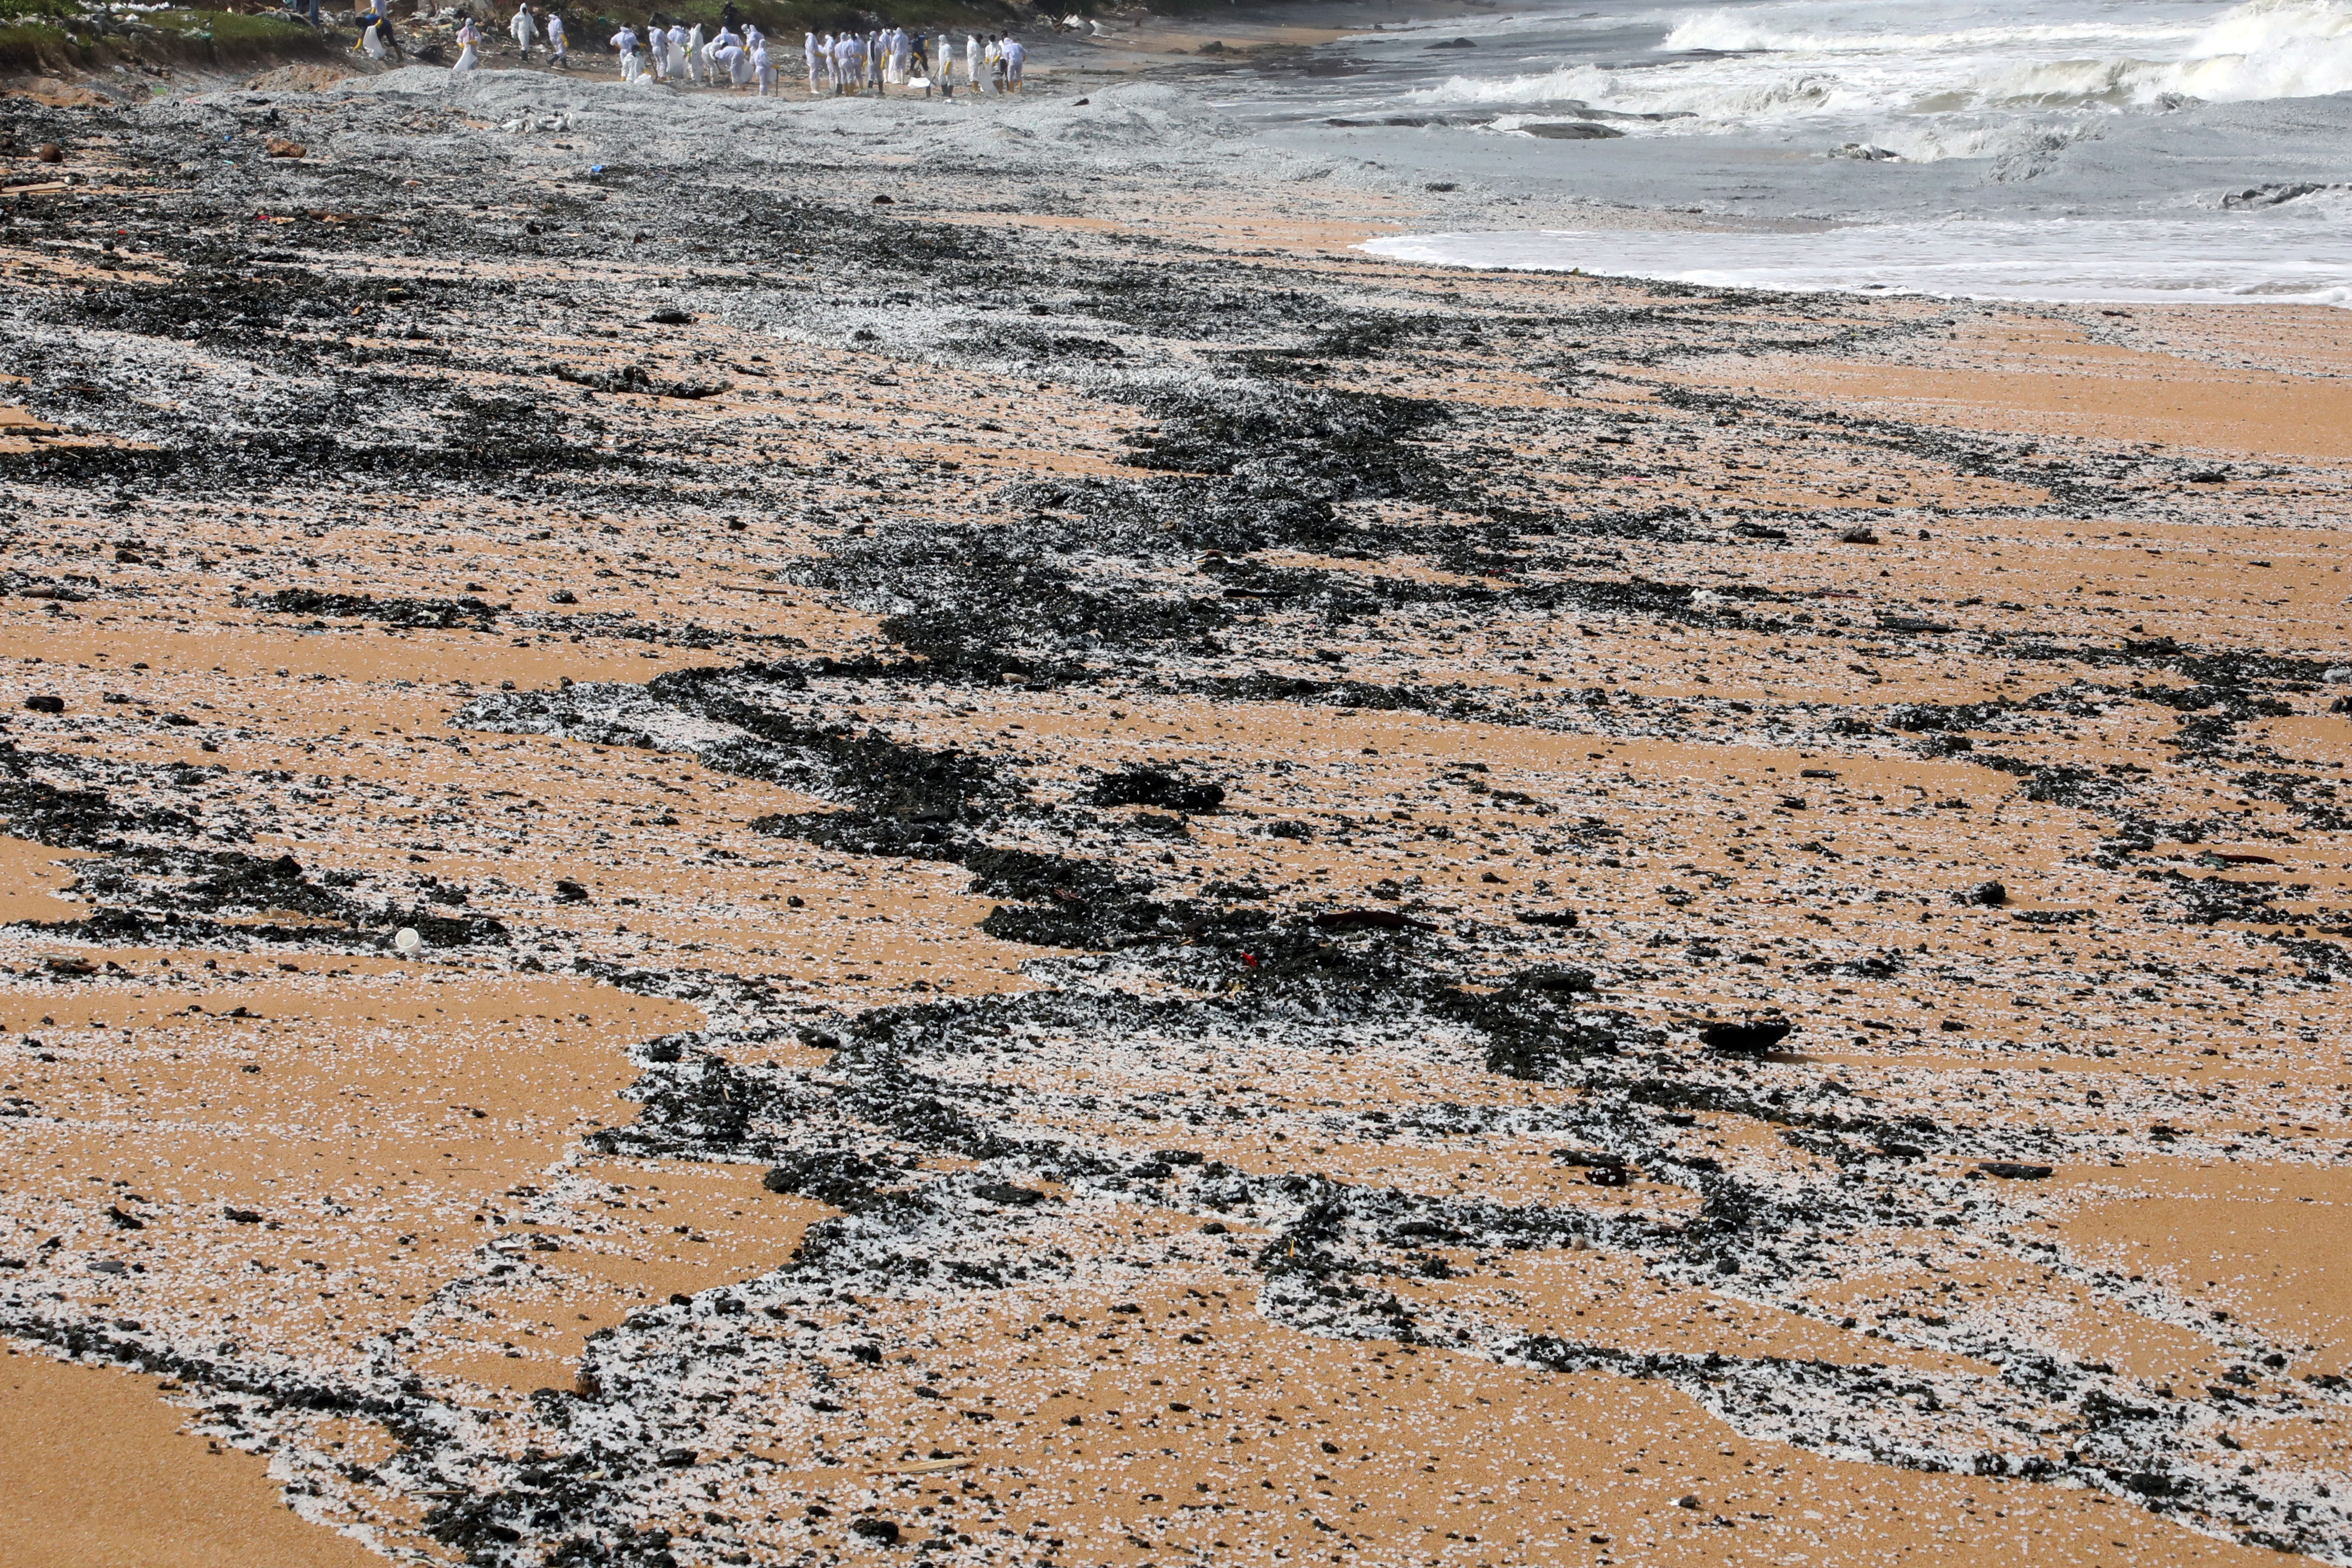 Debris and chemical granules used to manufacture plastic washed ashore in Sri Lanka